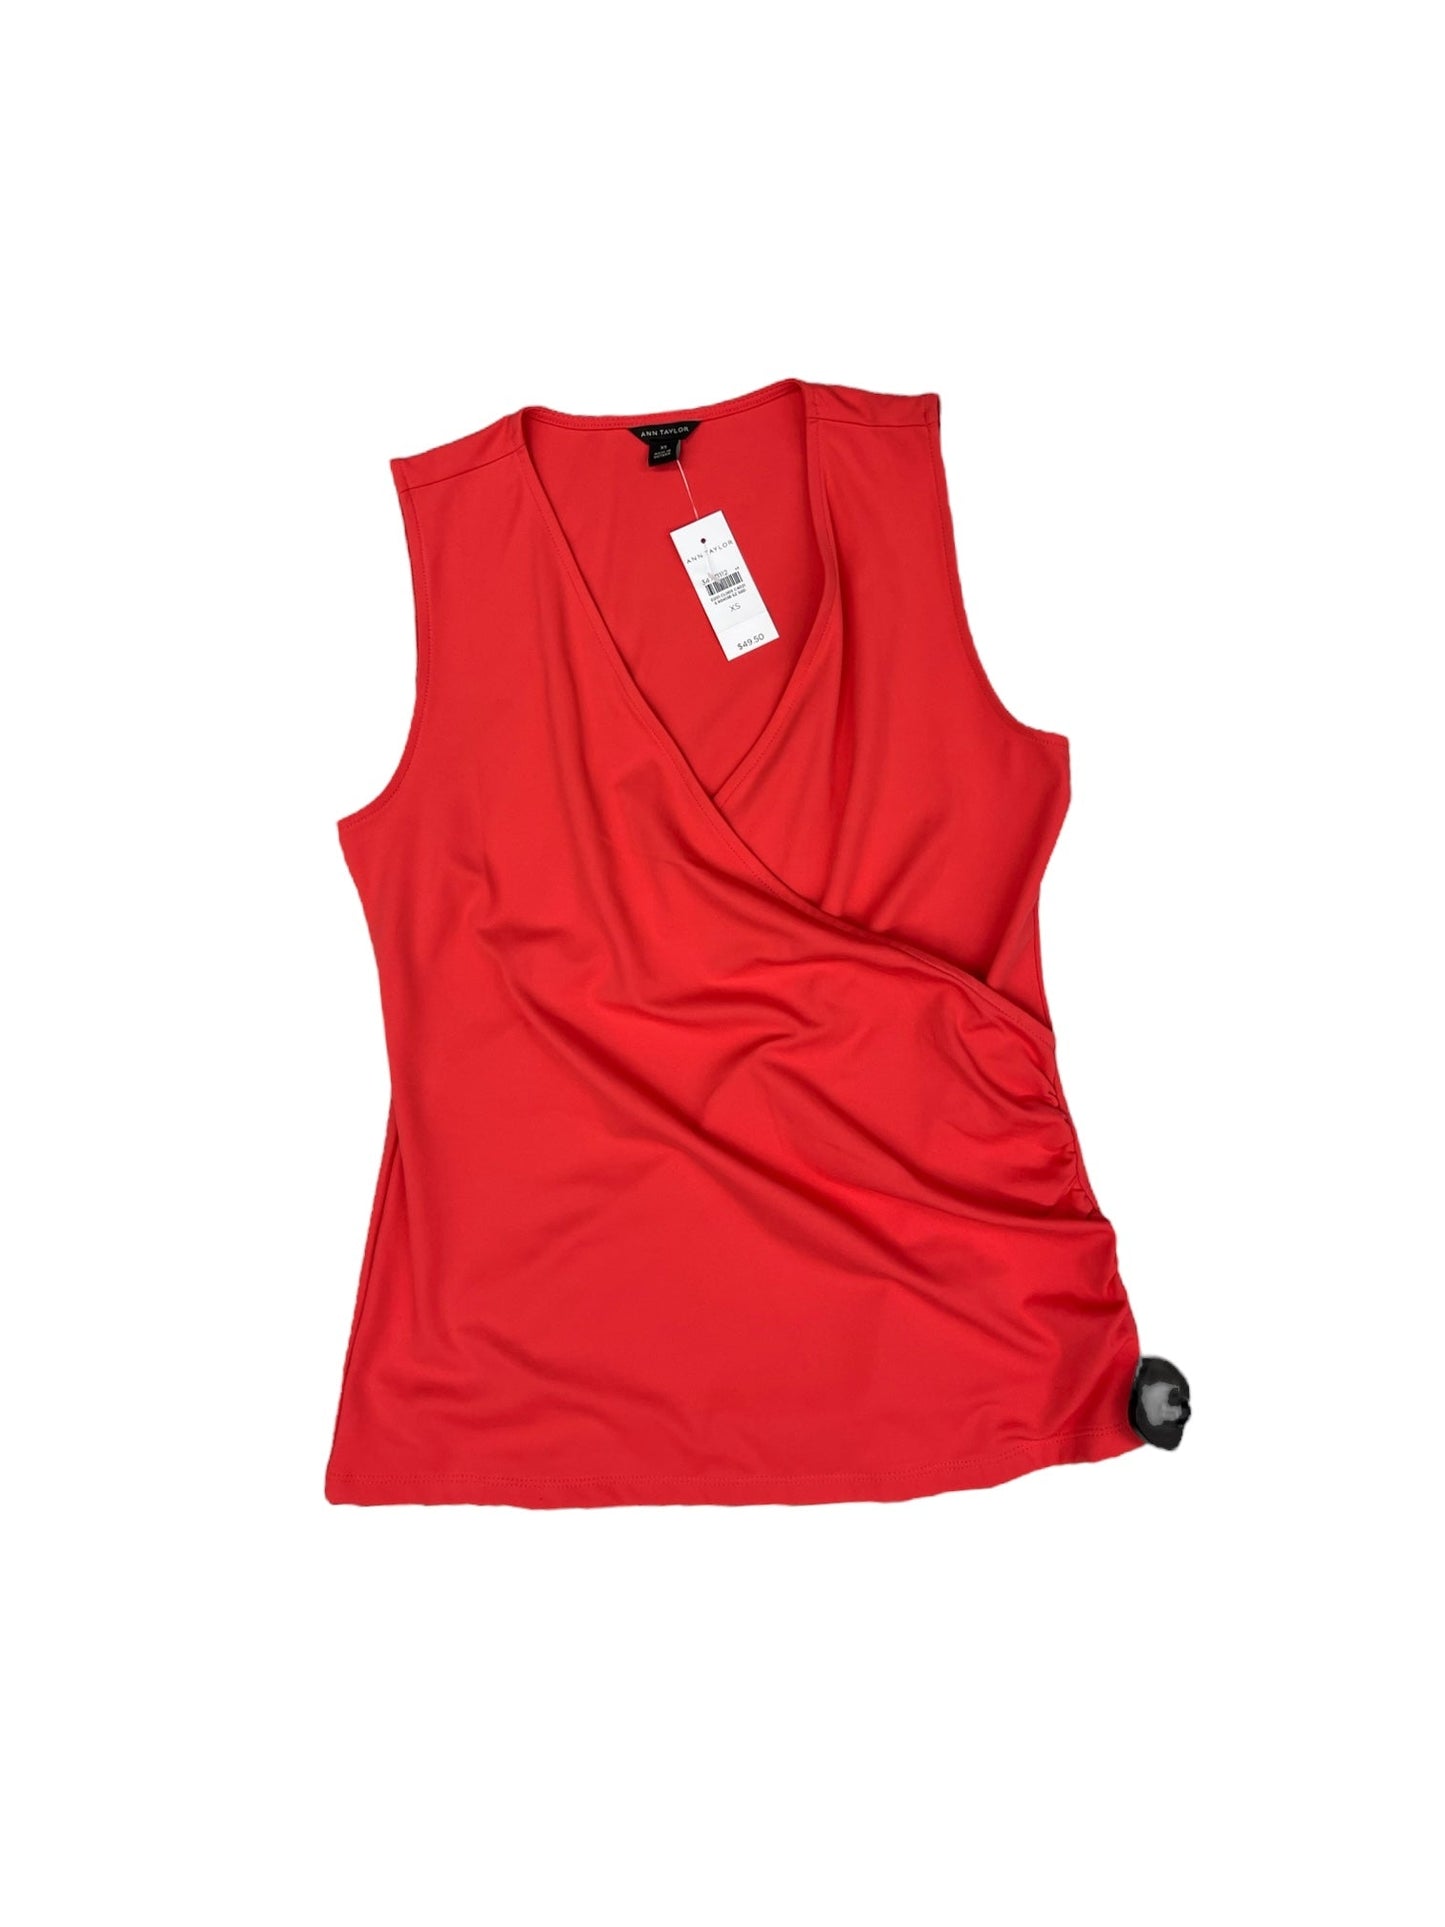 Coral Top Sleeveless Ann Taylor, Size Xs